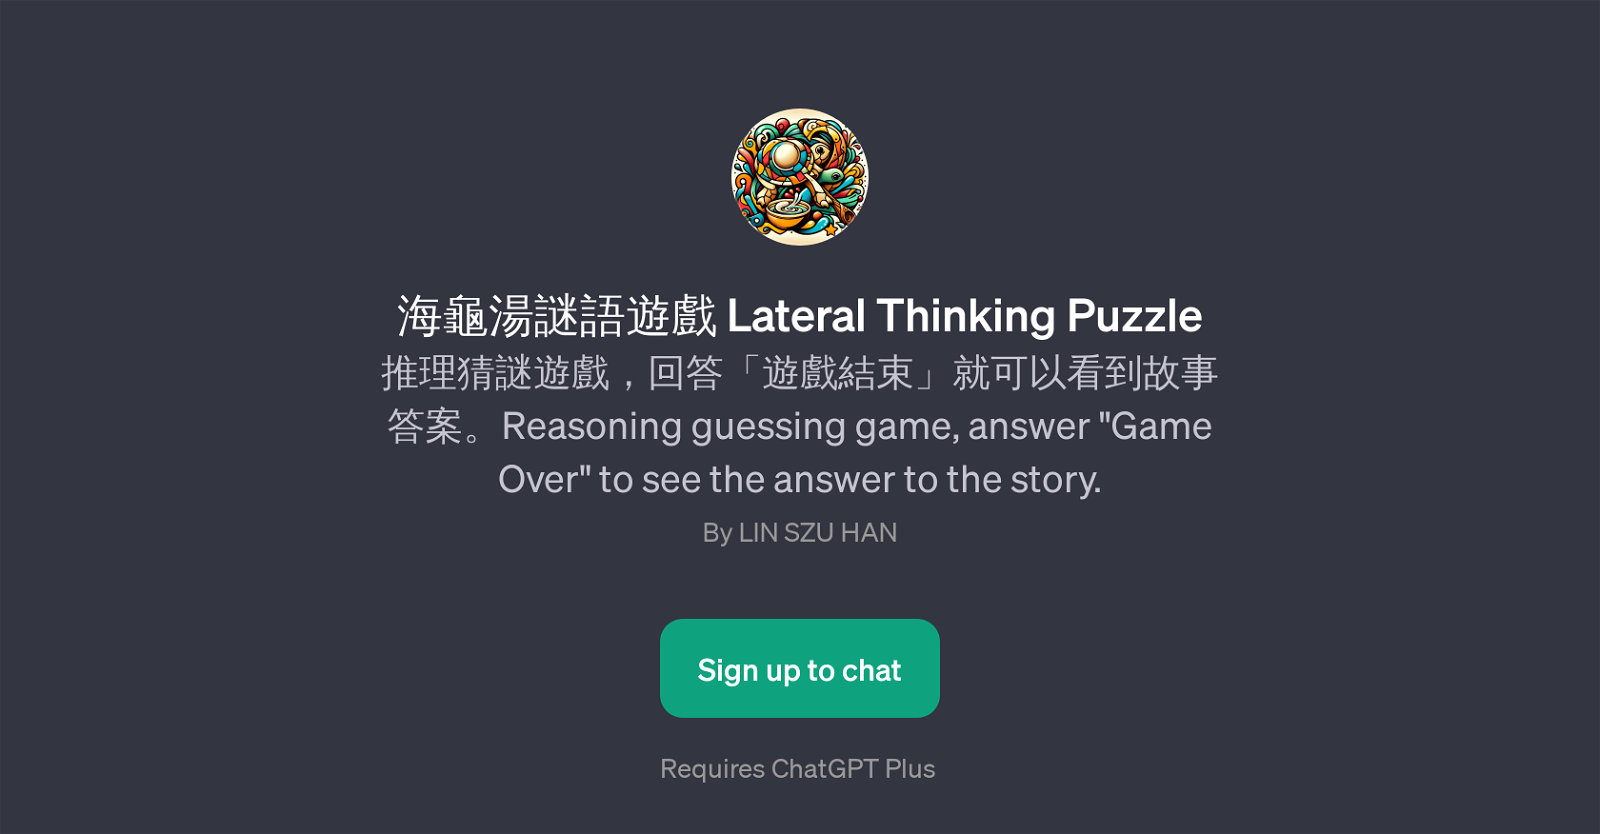 Lateral Thinking Puzzle website